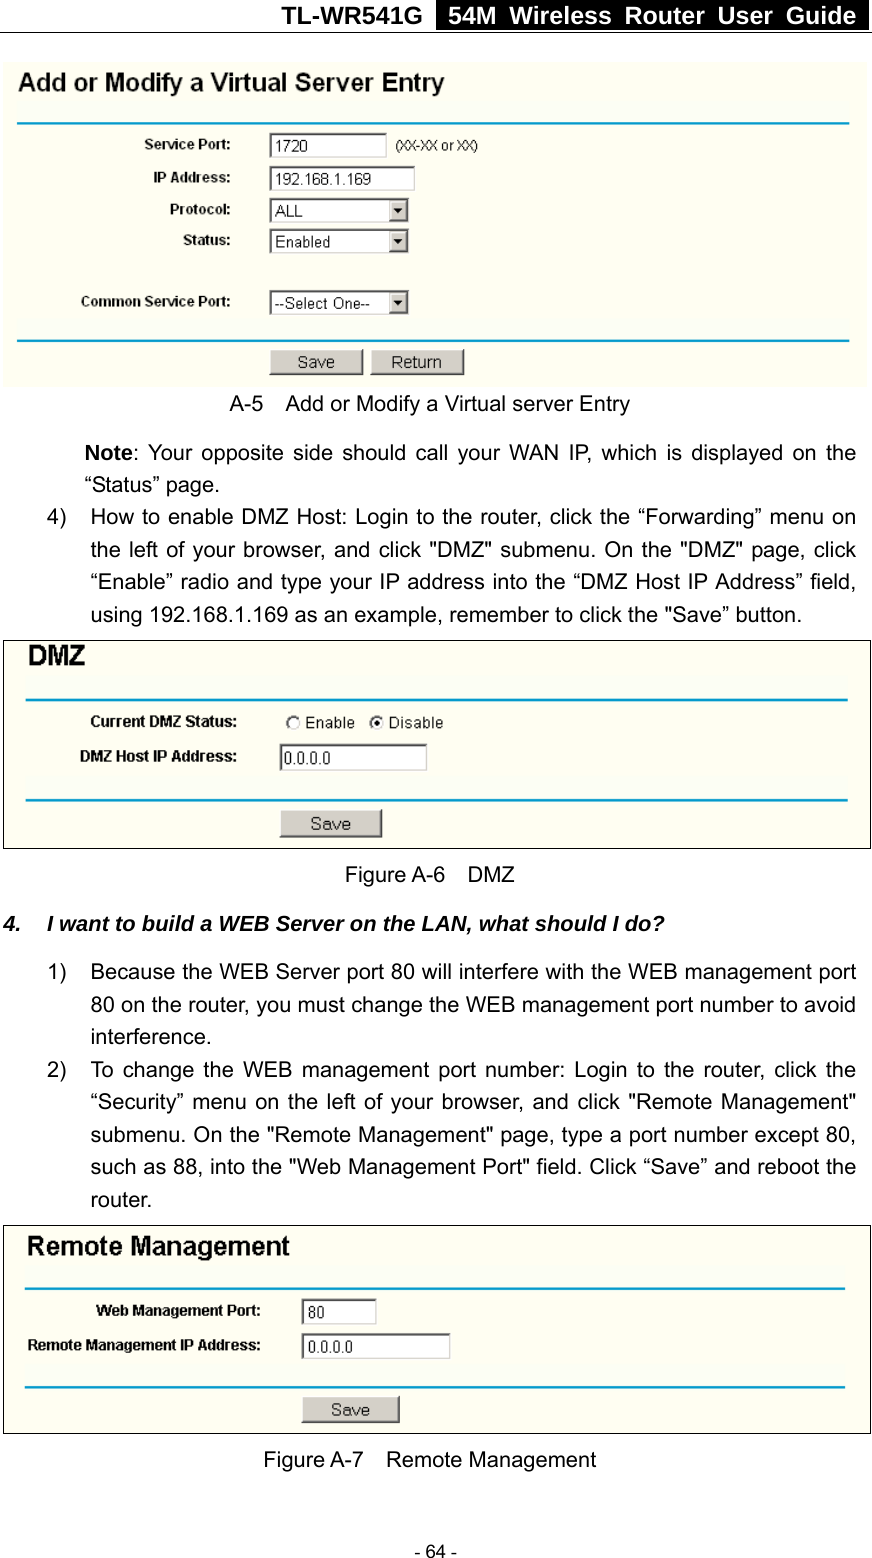 TL-WR541G   54M Wireless Router User Guide   A-5    Add or Modify a Virtual server Entry Note: Your opposite side should call your WAN IP, which is displayed on the “Status” page. 4)  How to enable DMZ Host: Login to the router, click the “Forwarding” menu on the left of your browser, and click &quot;DMZ&quot; submenu. On the &quot;DMZ&quot; page, click “Enable” radio and type your IP address into the “DMZ Host IP Address” field, using 192.168.1.169 as an example, remember to click the &quot;Save” button.    Figure A-6  DMZ 4.  I want to build a WEB Server on the LAN, what should I do? 1)  Because the WEB Server port 80 will interfere with the WEB management port 80 on the router, you must change the WEB management port number to avoid interference. 2)  To change the WEB management port number: Login to the router, click the “Security” menu on the left of your browser, and click &quot;Remote Management&quot; submenu. On the &quot;Remote Management&quot; page, type a port number except 80, such as 88, into the &quot;Web Management Port&quot; field. Click “Save” and reboot the router.  Figure A-7  Remote Management  - 64 - 